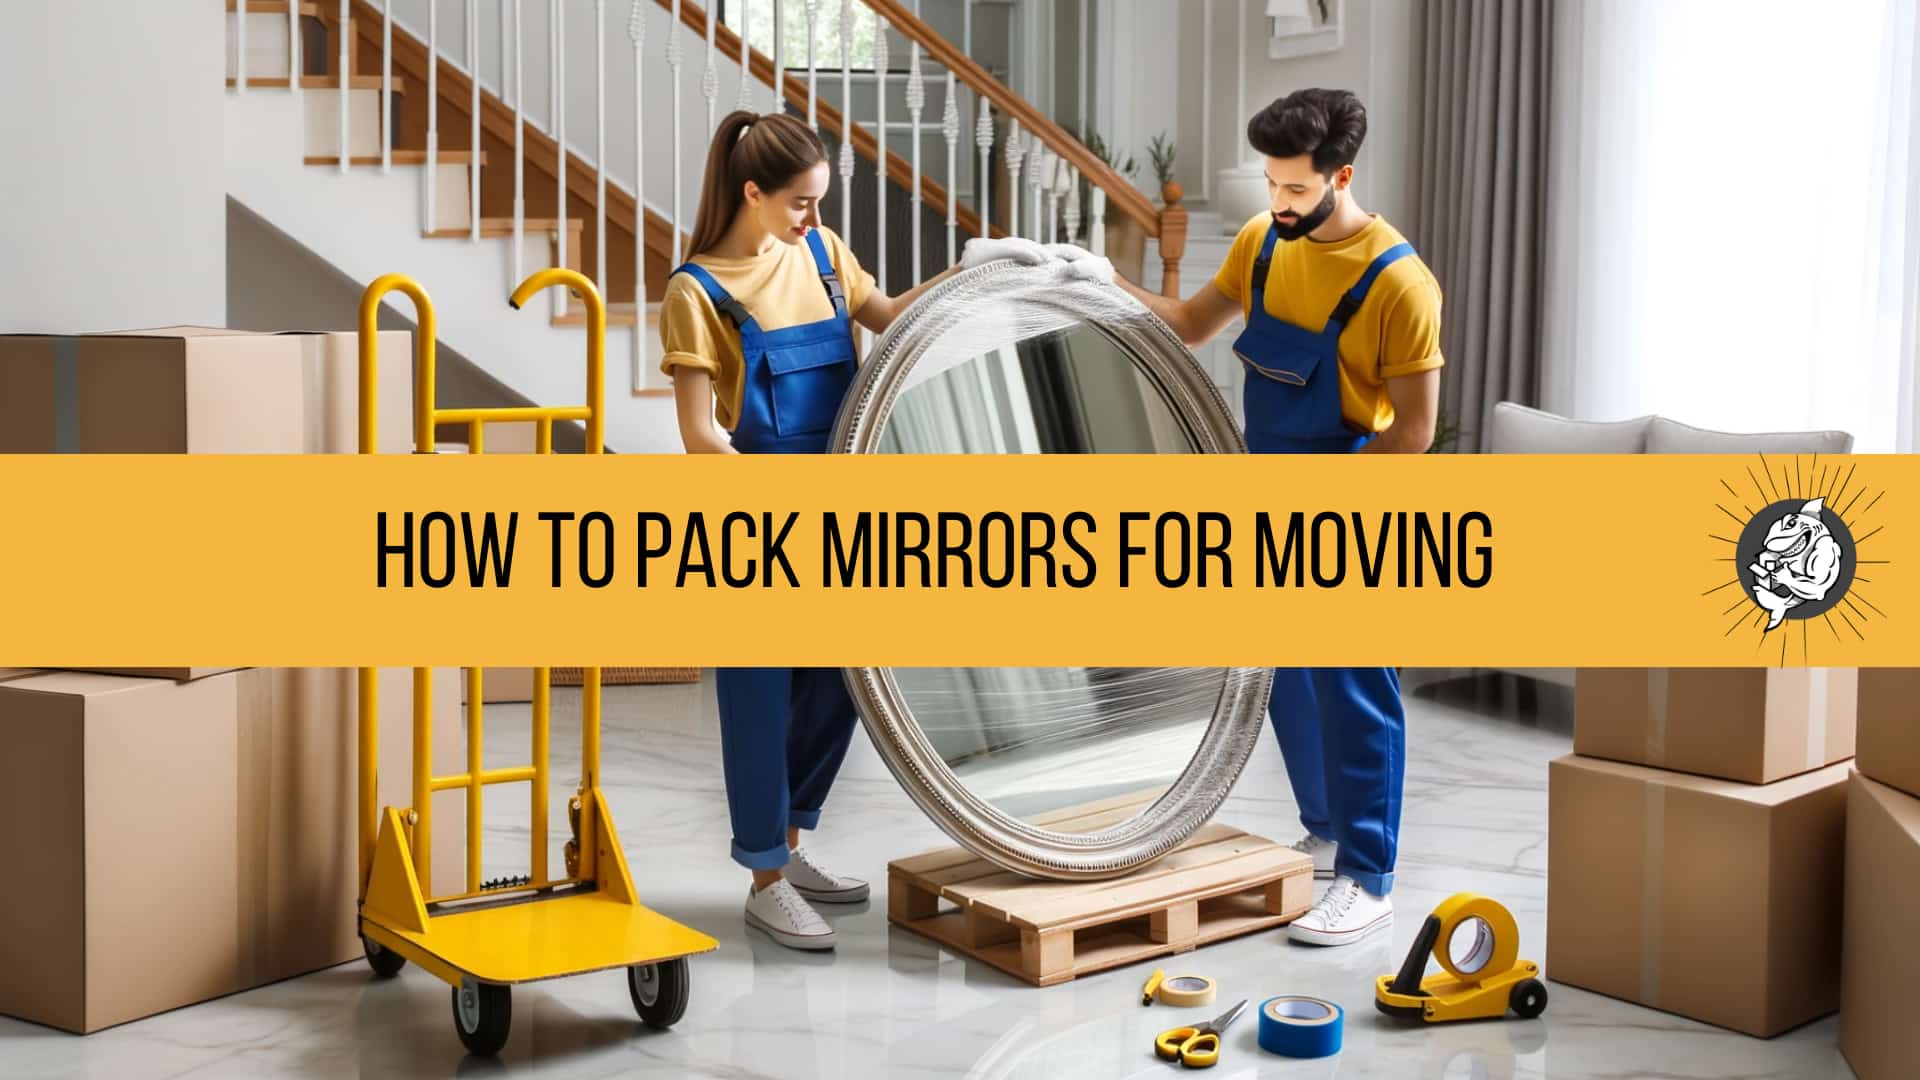 How to Pack Mirrors for Moving